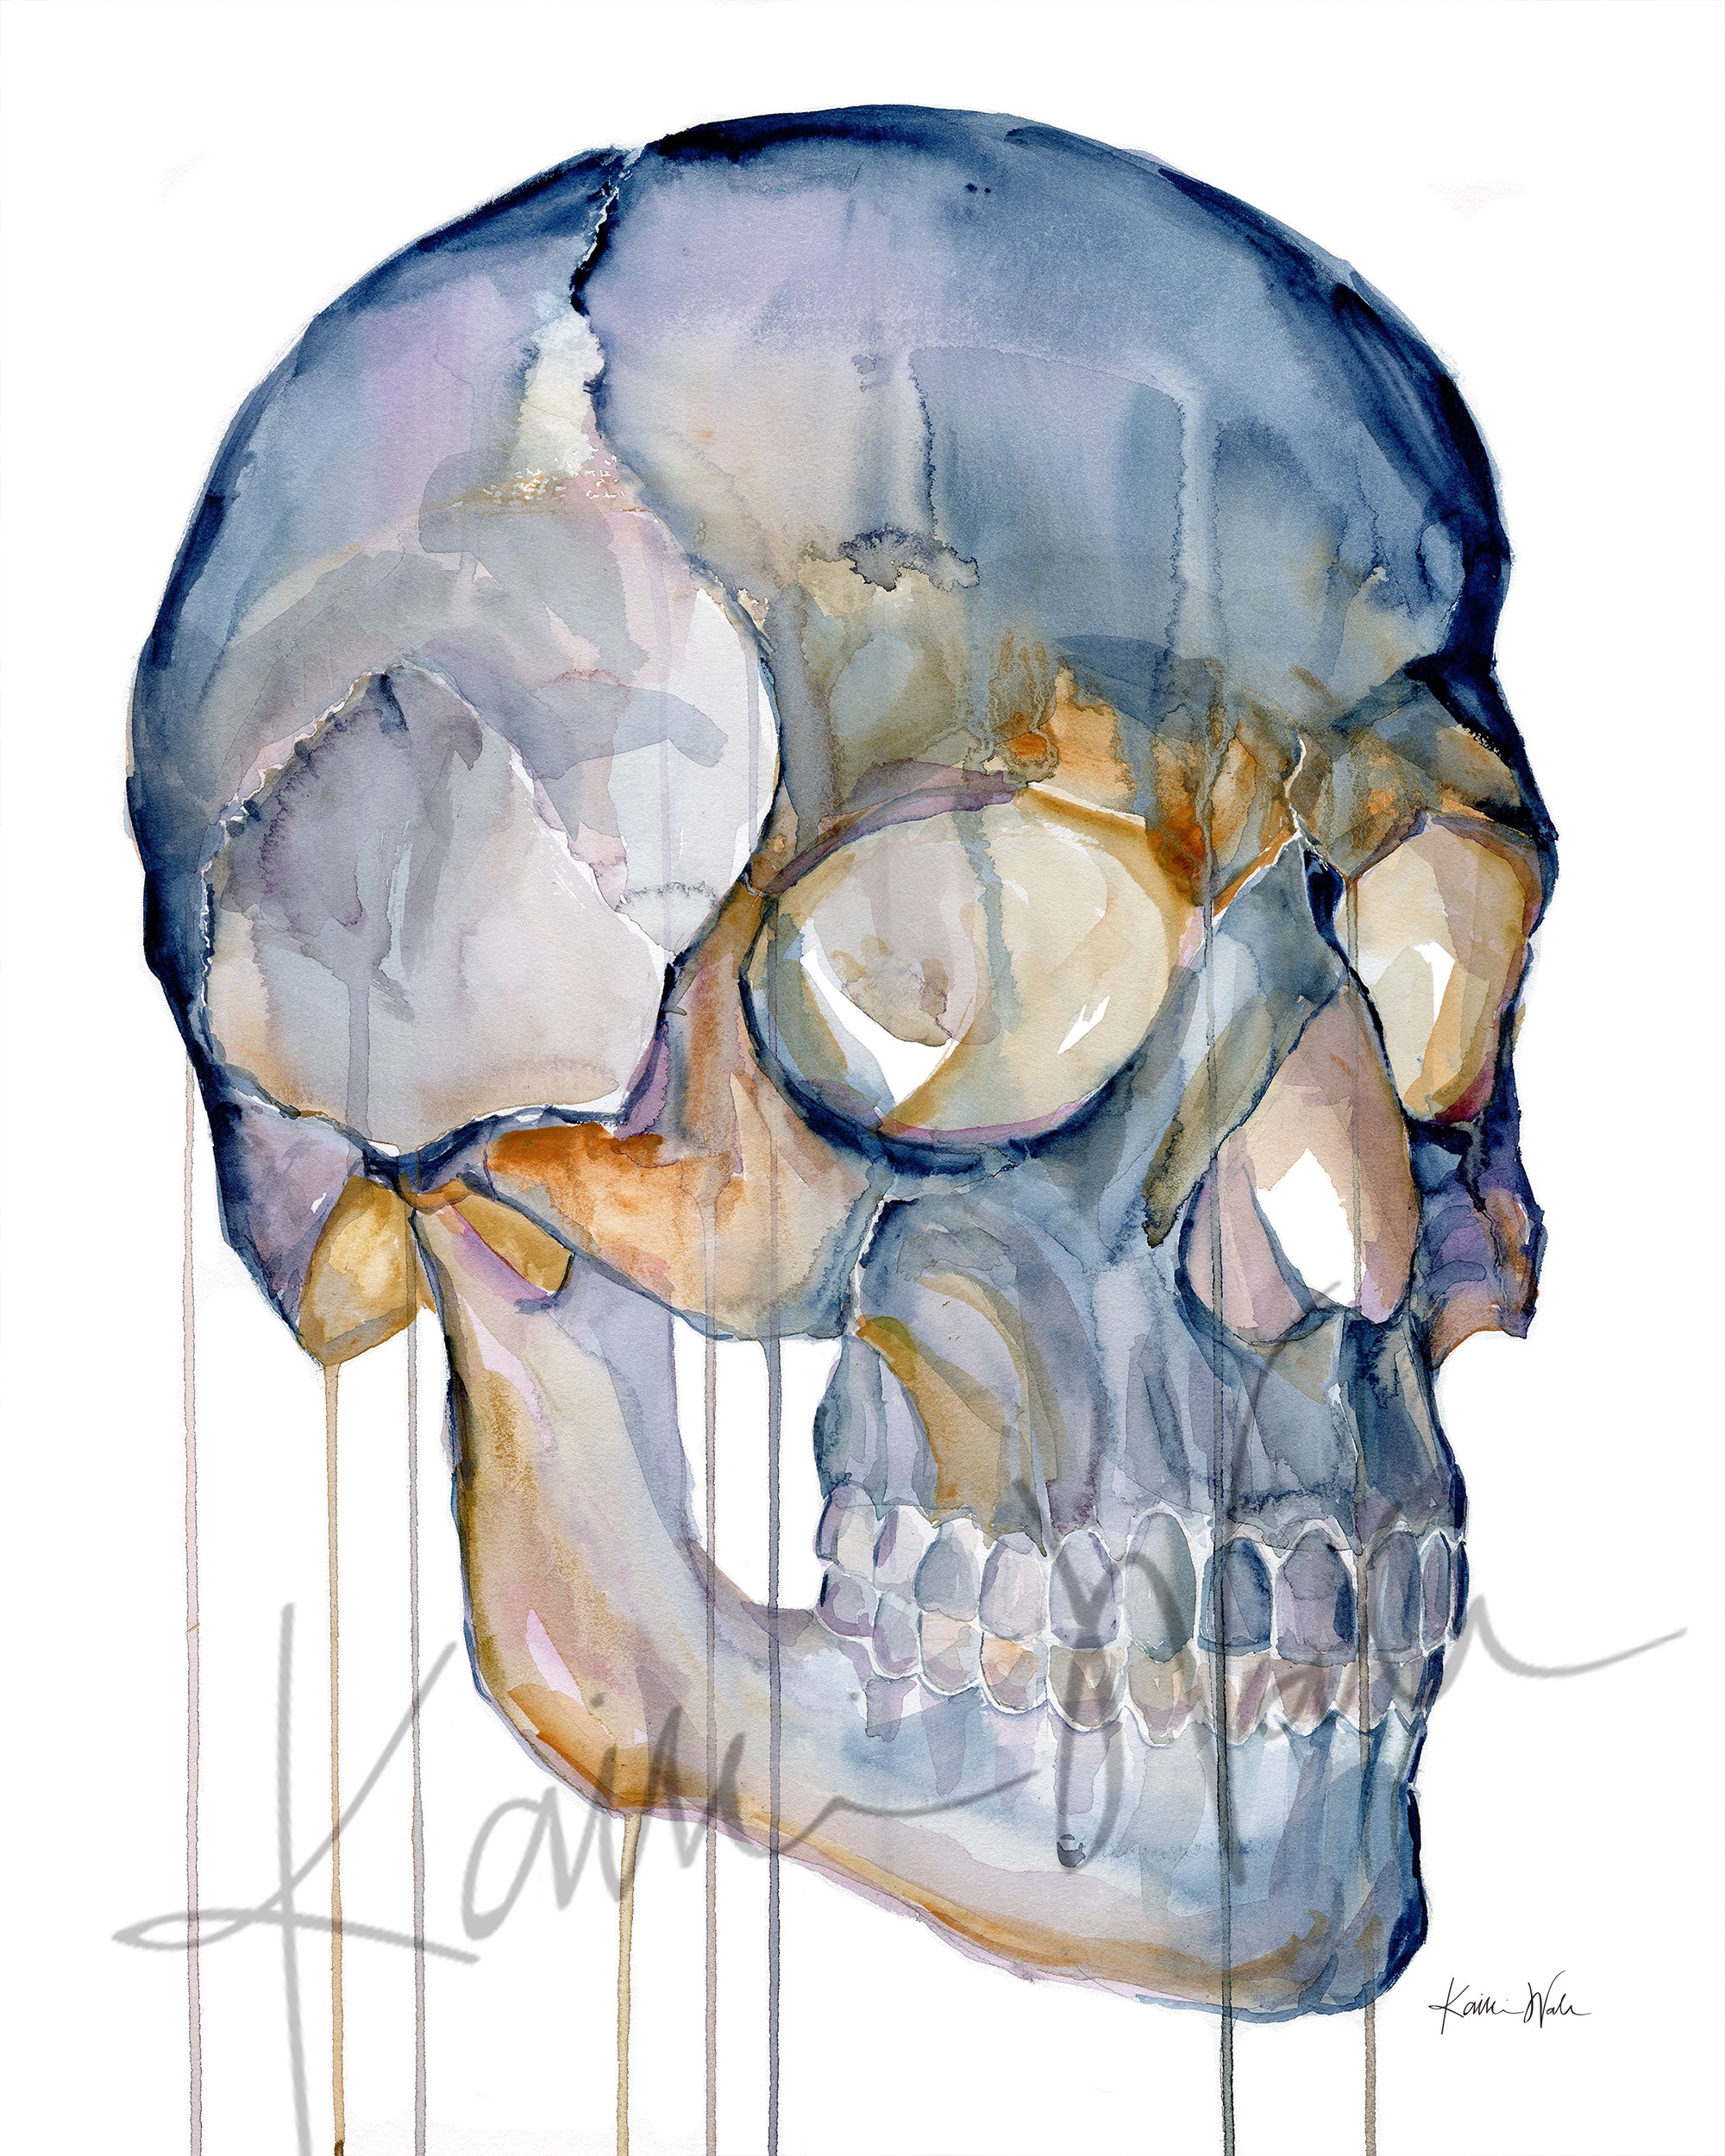 Unframed watercolor painting of a skull from a three quarter view.